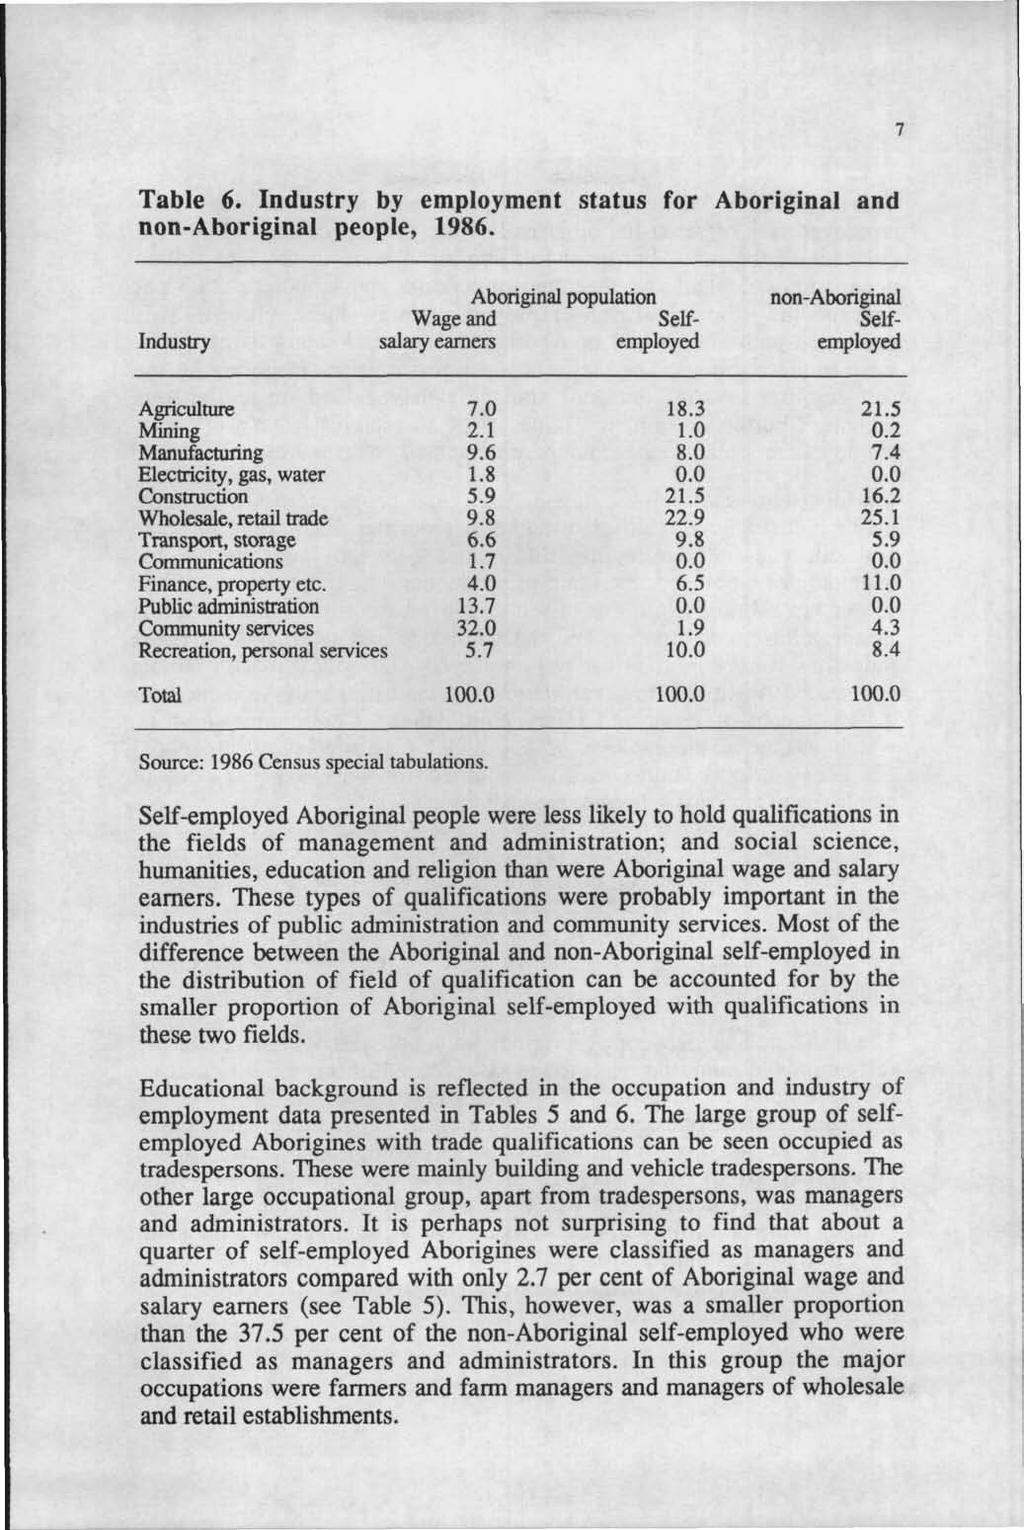 Table 6. Industry by employment status for Aboriginal and non-aboriginal people, 1986.